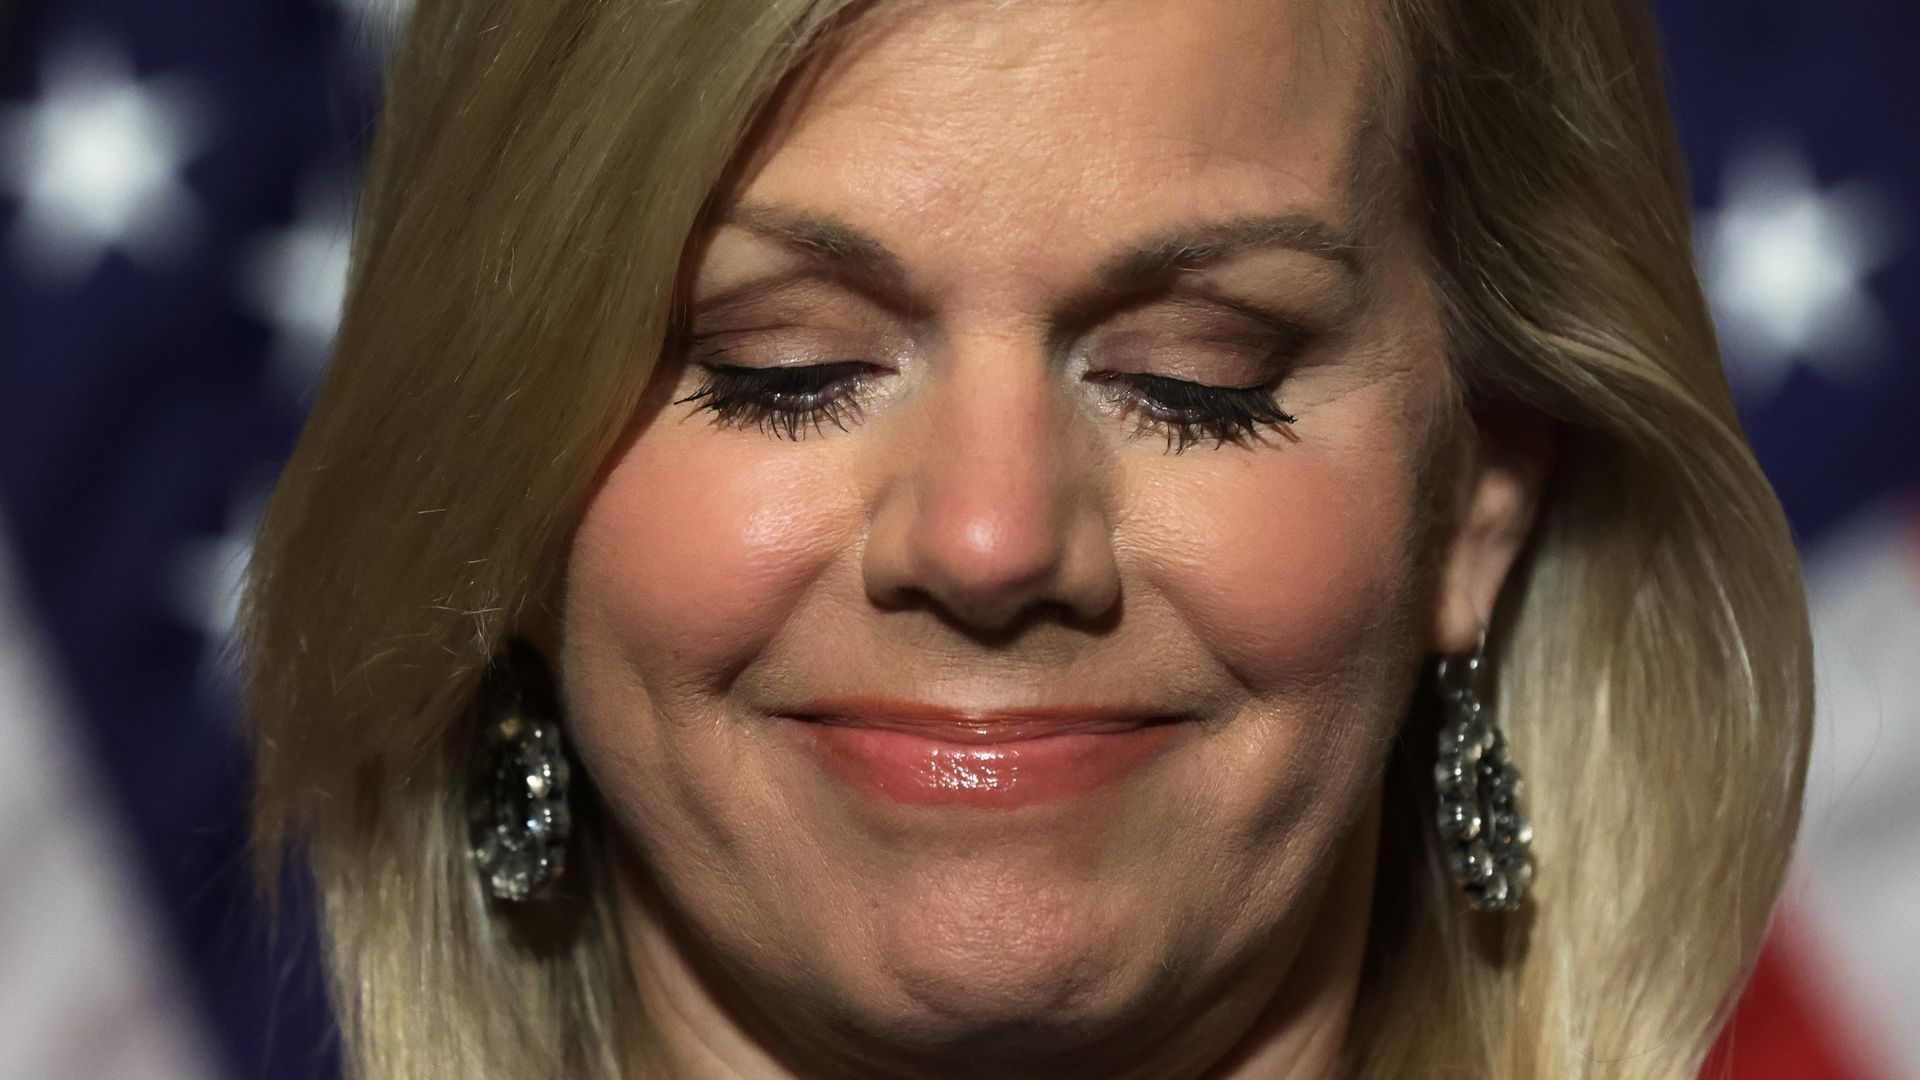 Former Fox News Gretchen Carlson is seen smiling after the Senate passed legislation she had pushed.